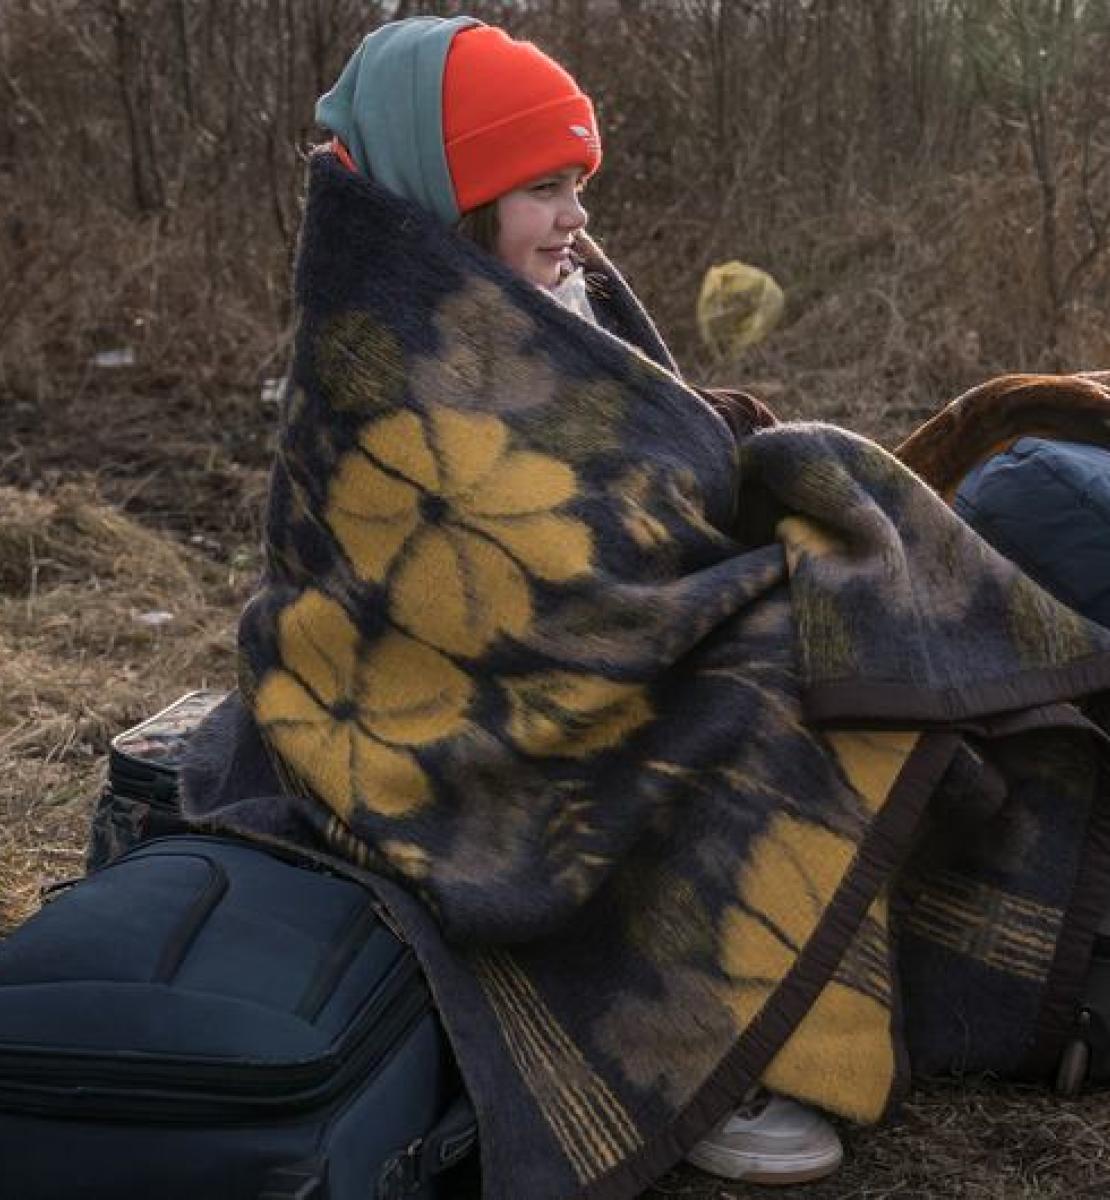 A young girl arrives in Romania to seek shelter from the ongoing conflict in Ukraine.